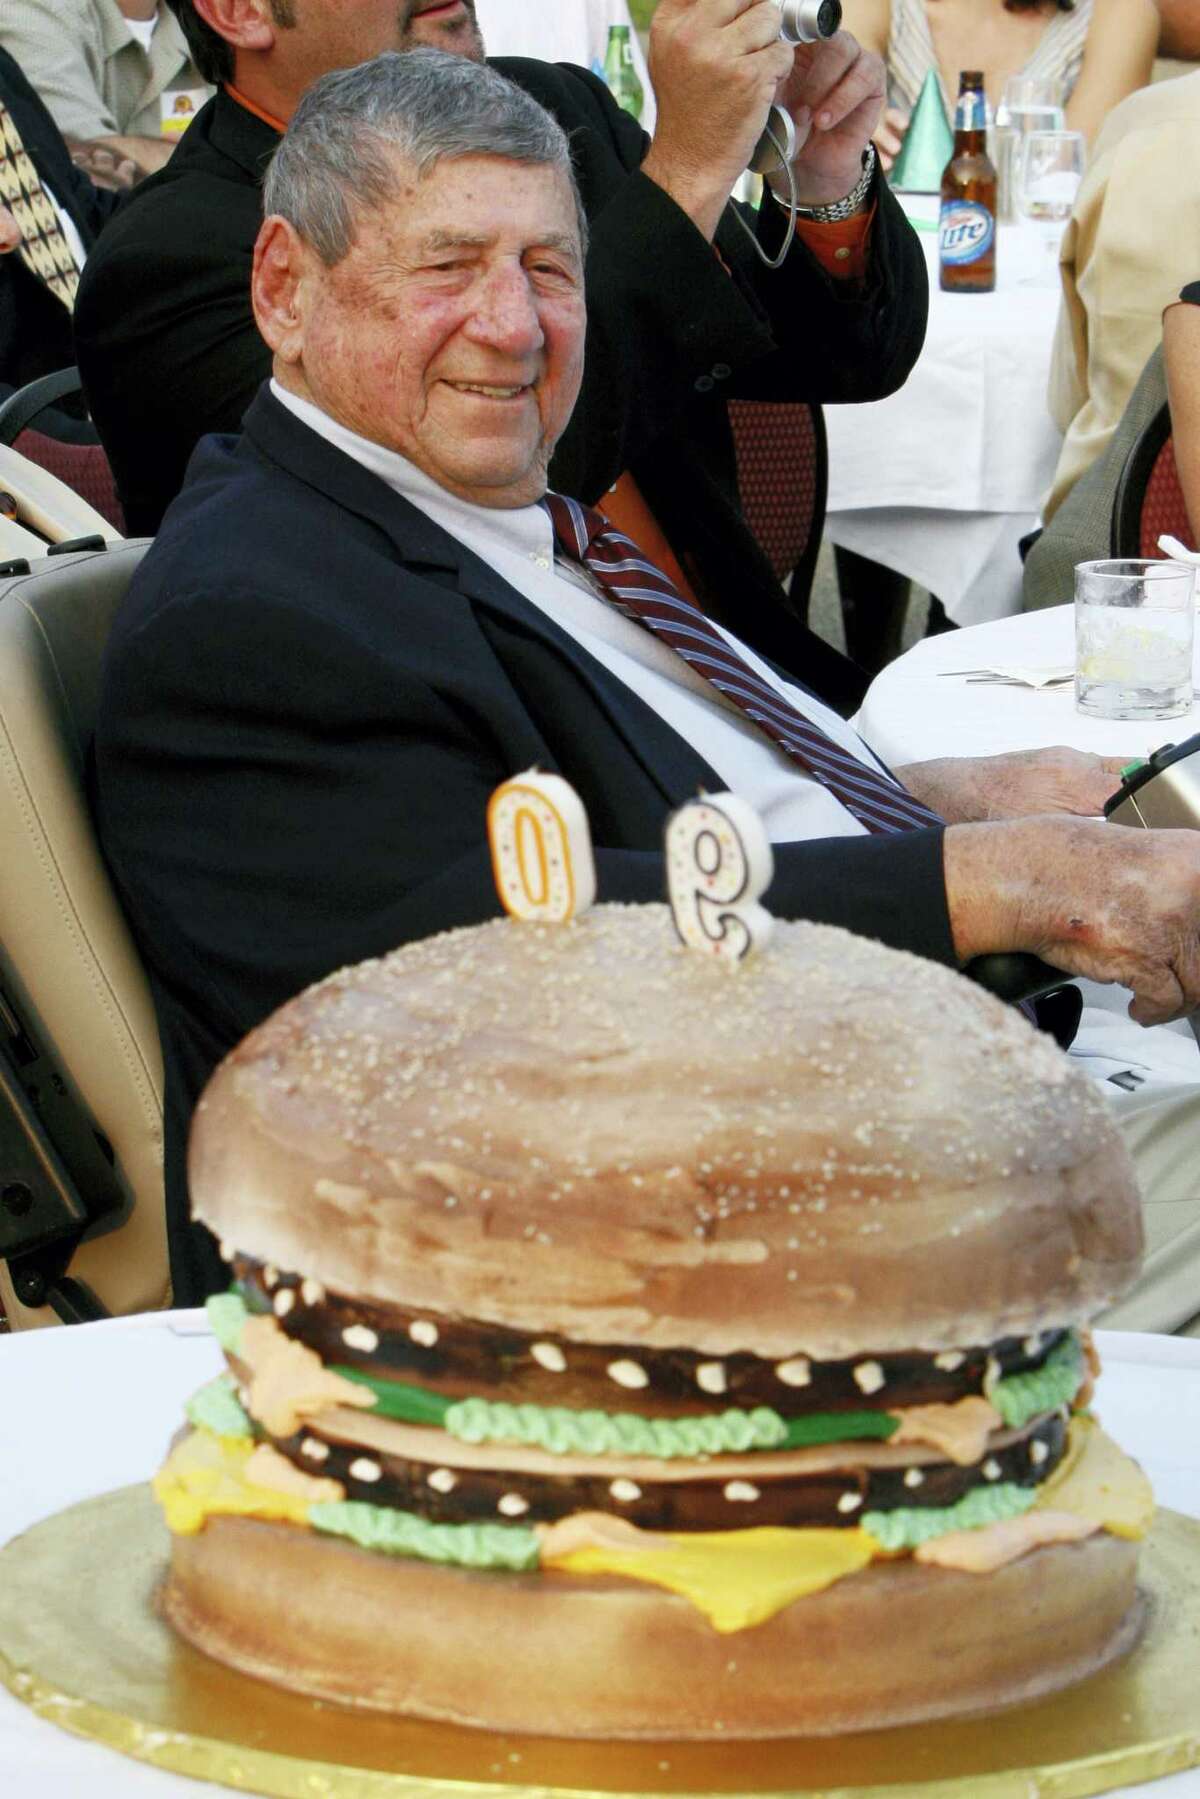 In this file photo, Big Mac creator Michael “Jim” Delligatti sits behind a Big Mac birthday cake at his 90th birthday party in Canonsburg, Pa. Delligatti, the Pittsburgh-area McDonald’s franchisee who created the Big Mac in 1967, has died. He was 98.